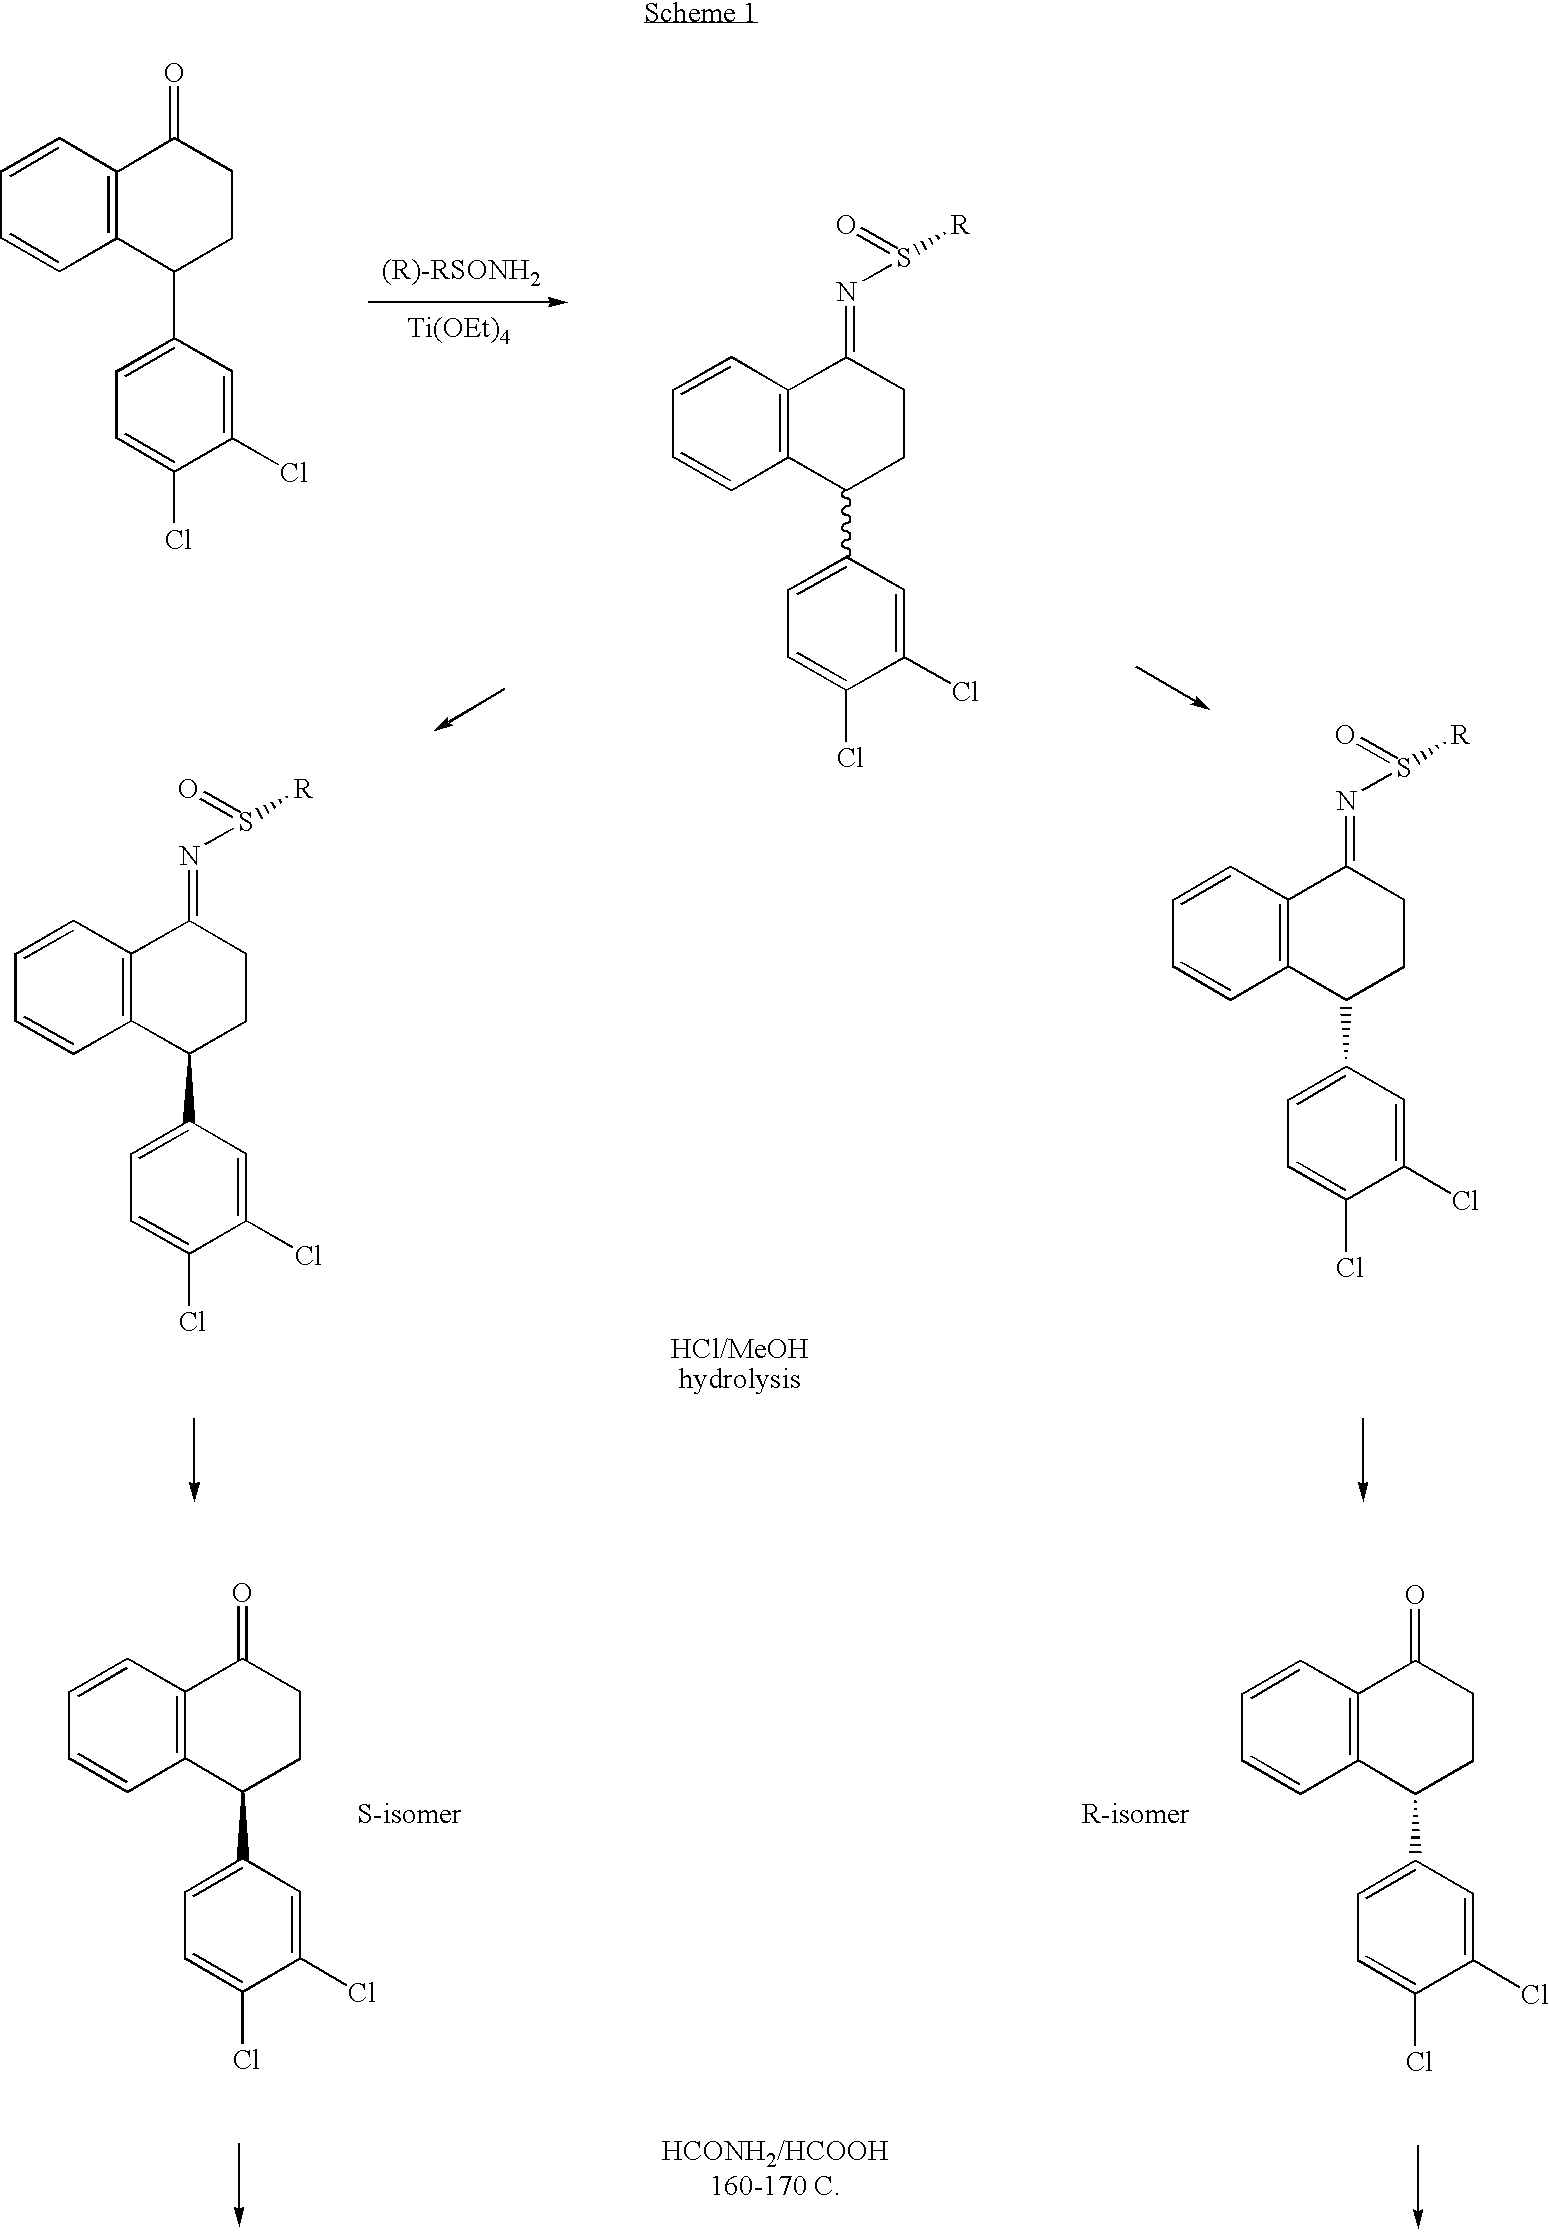 Combinations of Eszopiclone and Trans 4-(3,4-Dichlorophenyl)-1,2,3,4-Tetrahydro-N-Methyl-1-Napthalenamine or Trans 4-(3,4-Dichlorophenyl)-1,2,3,4-Tetrahydro-1-Napthalenamine, and Methods of Treatment of Menopause and Mood, Anxiety, and Cognitive Disorders